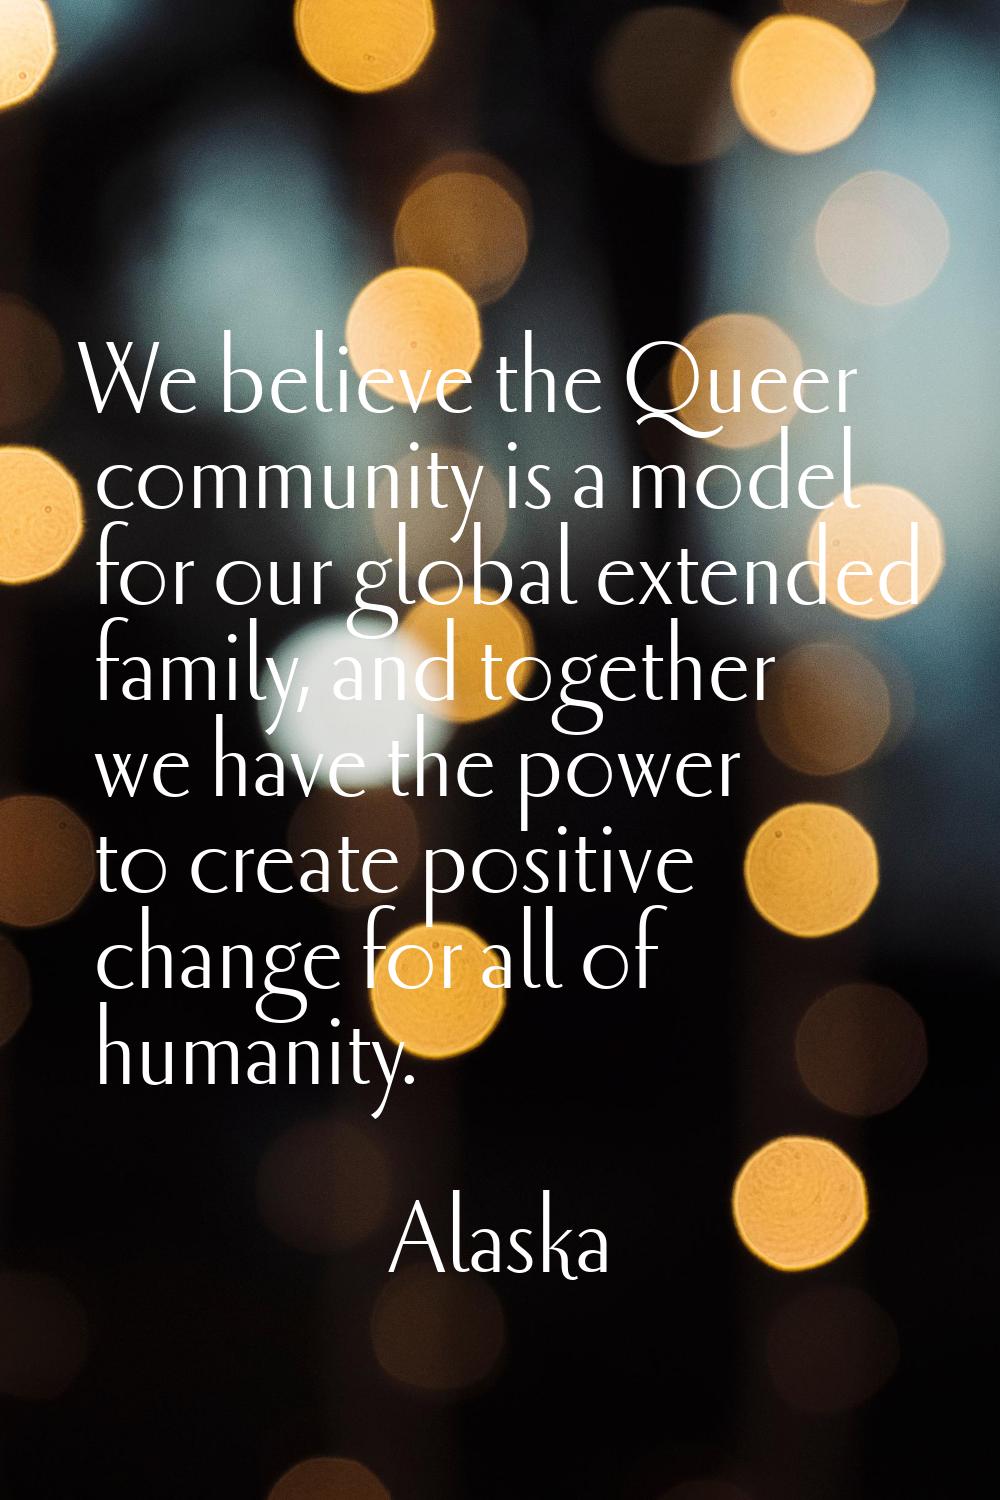 We believe the Queer community is a model for our global extended family, and together we have the 